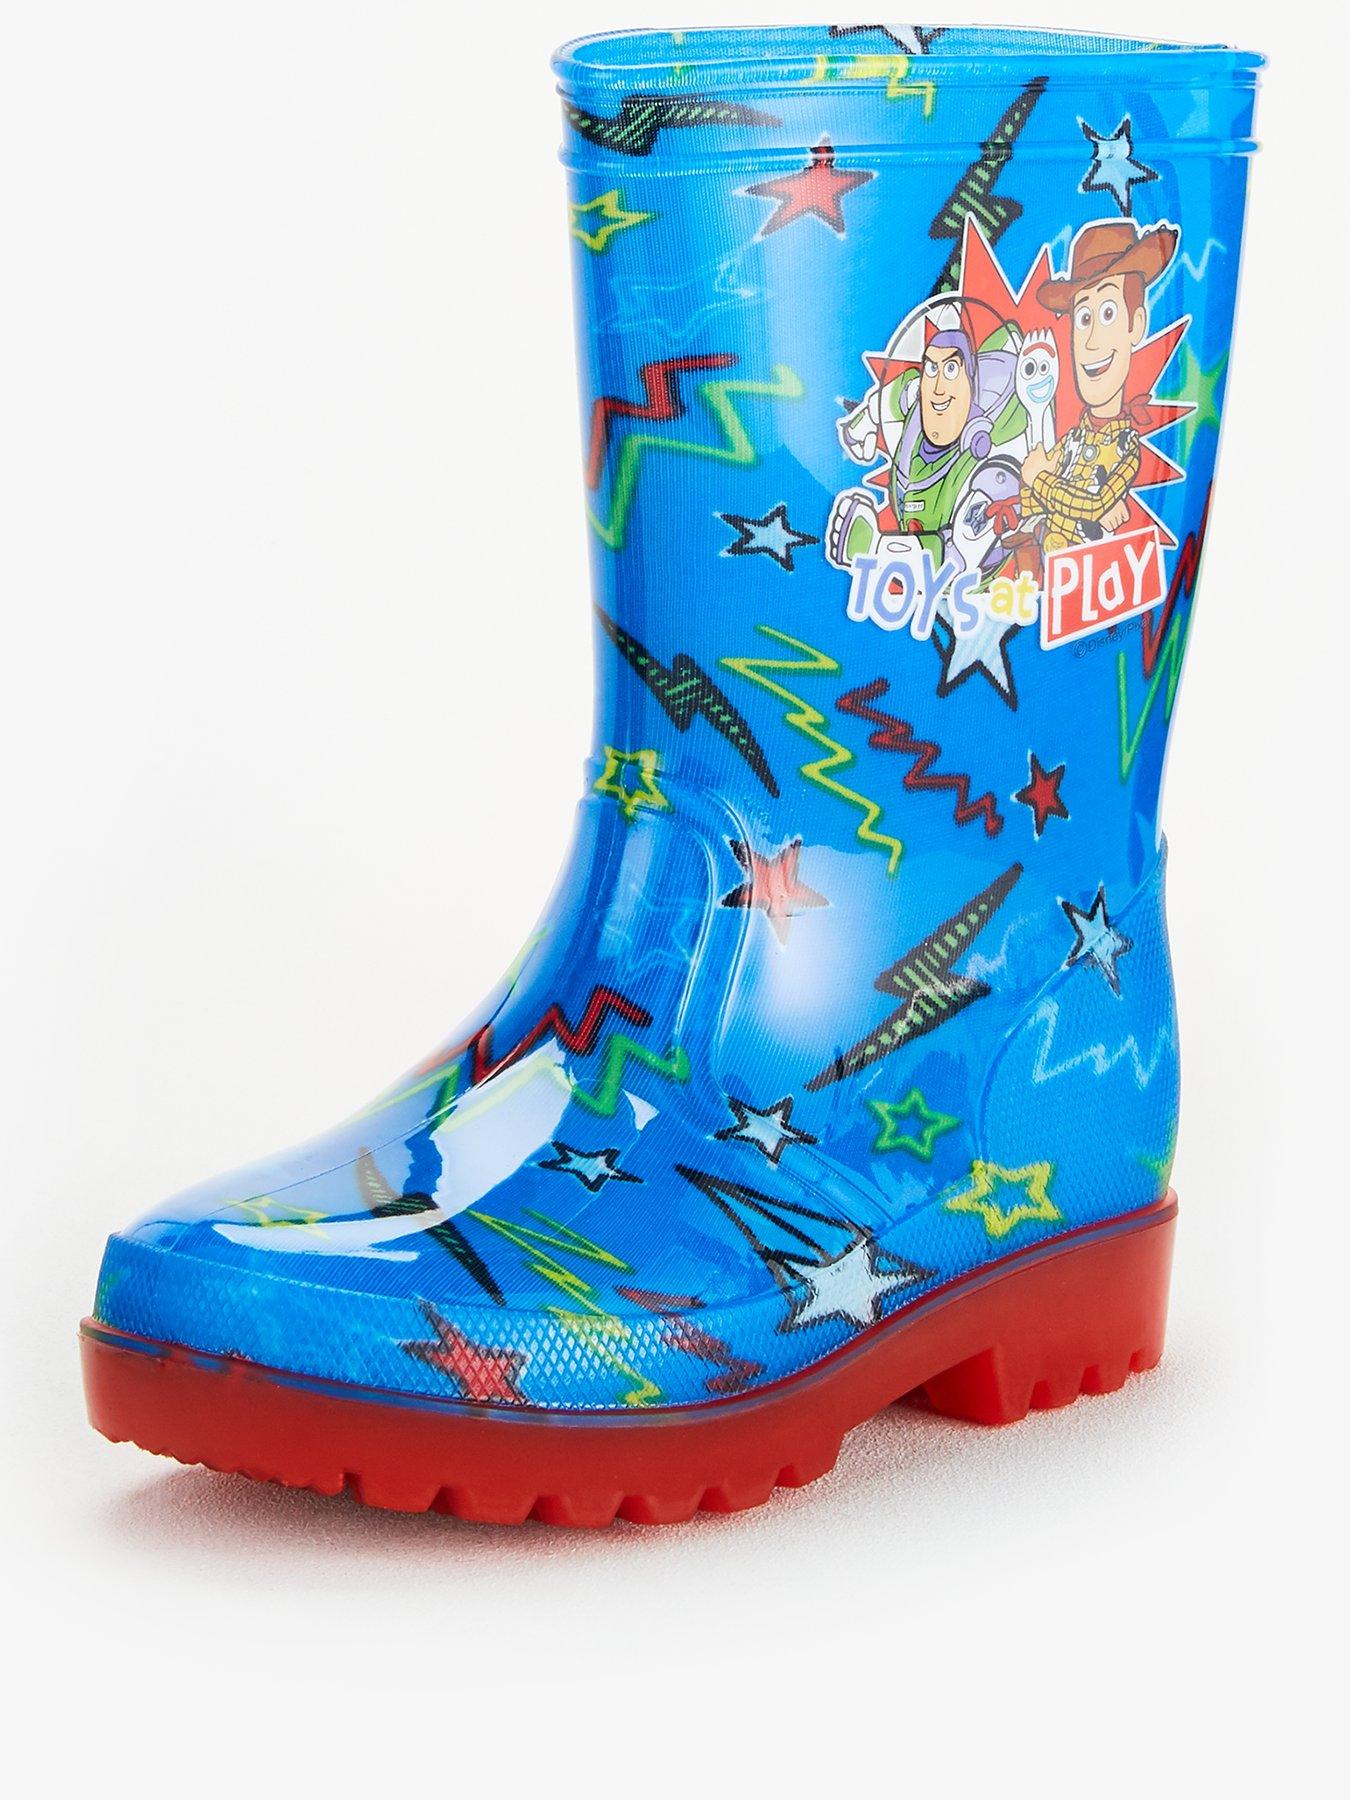 toy story 4 wellies